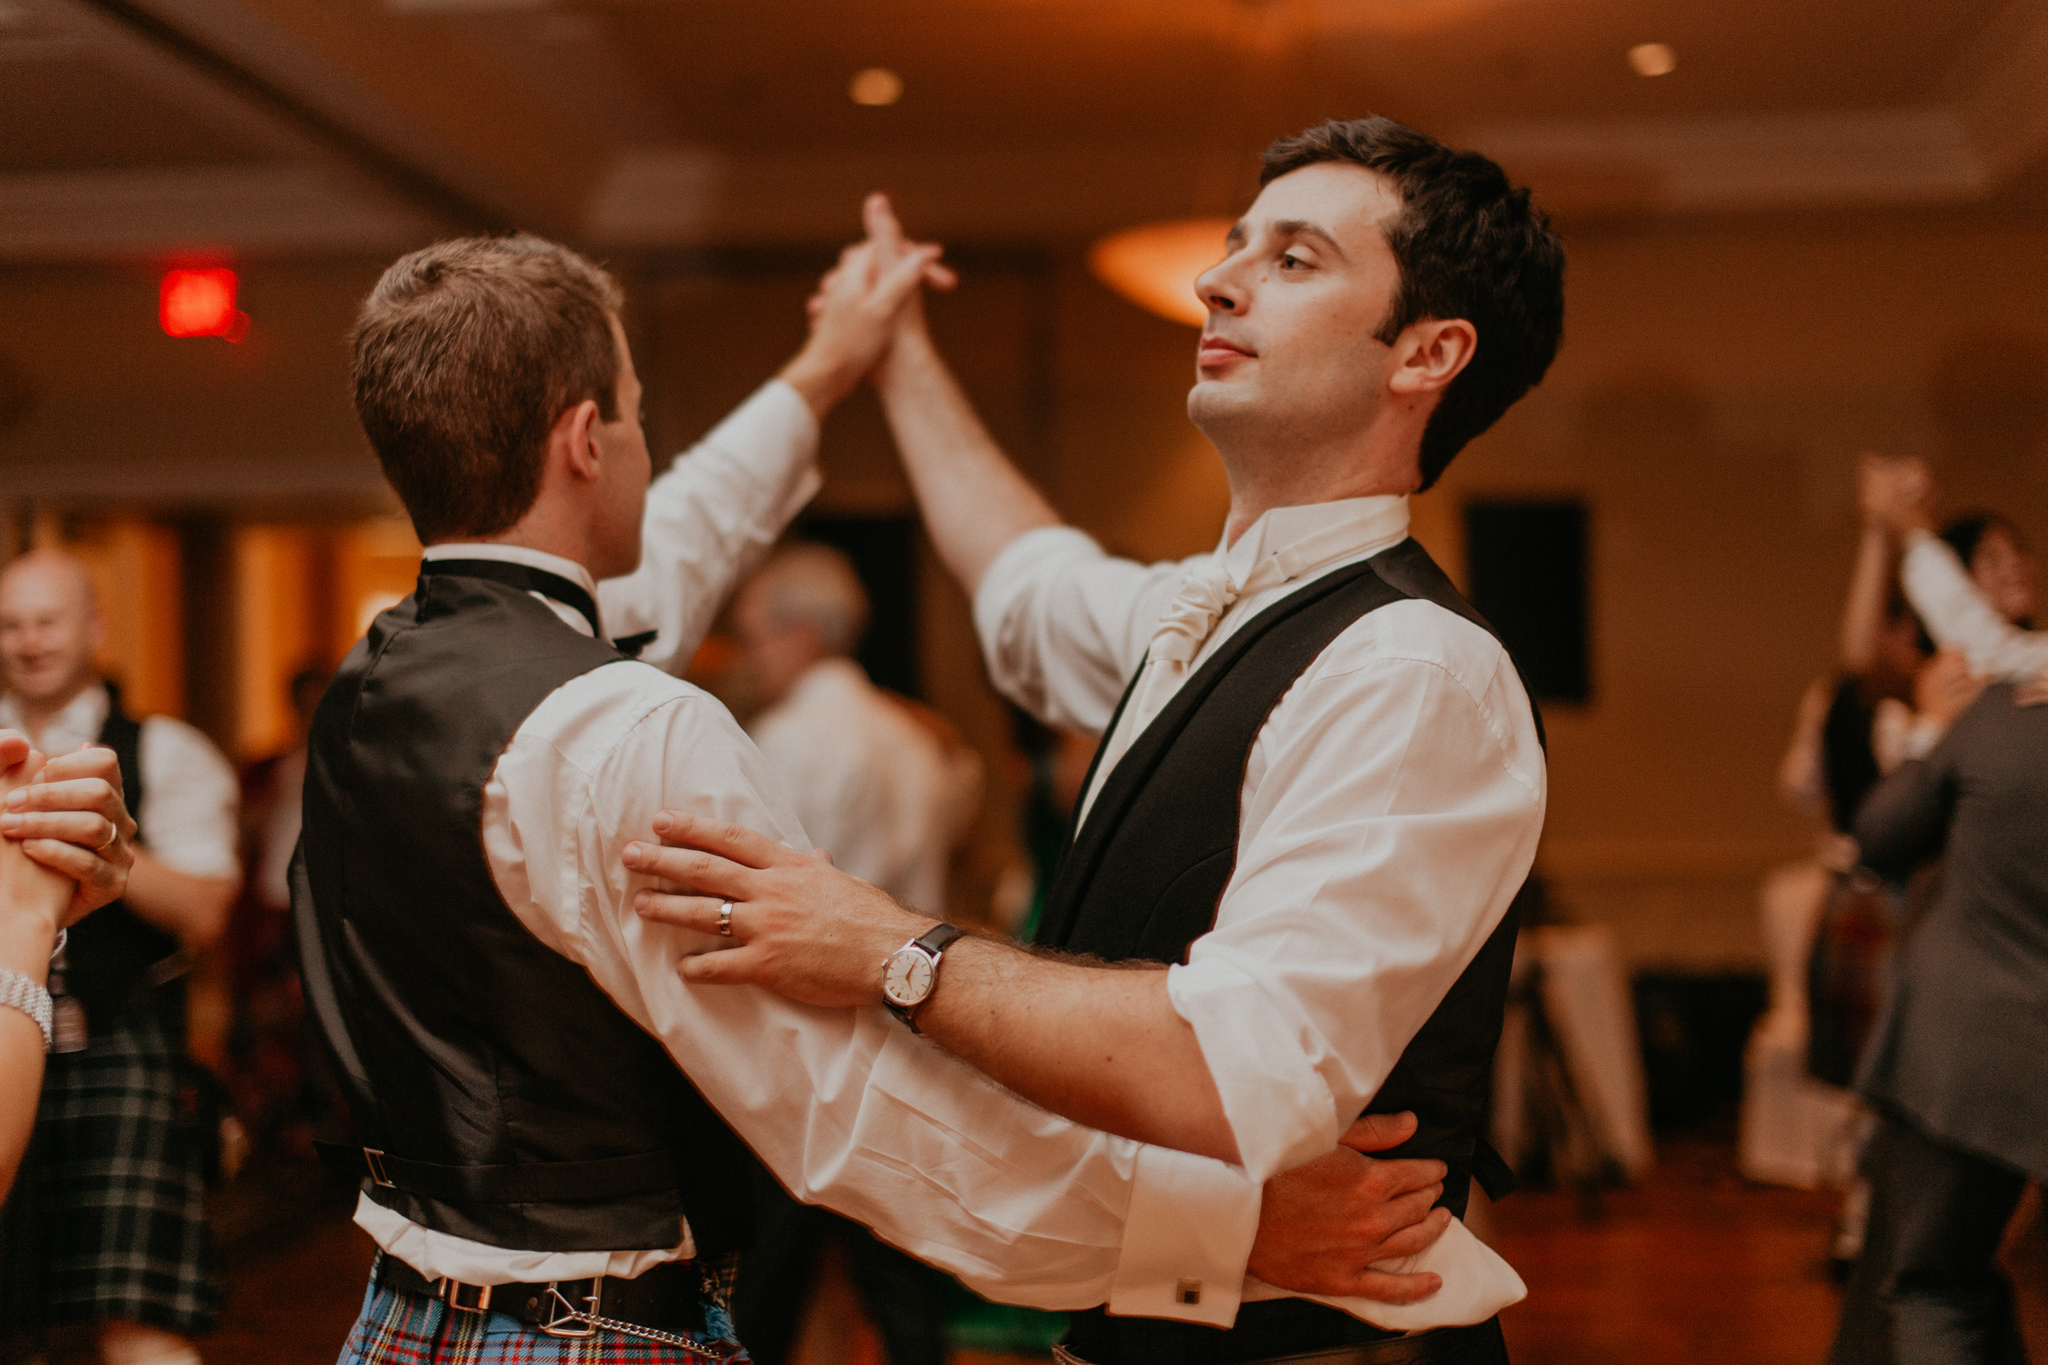 Groom and groomsmen dance in kilts at wedding reception candid documentary photography